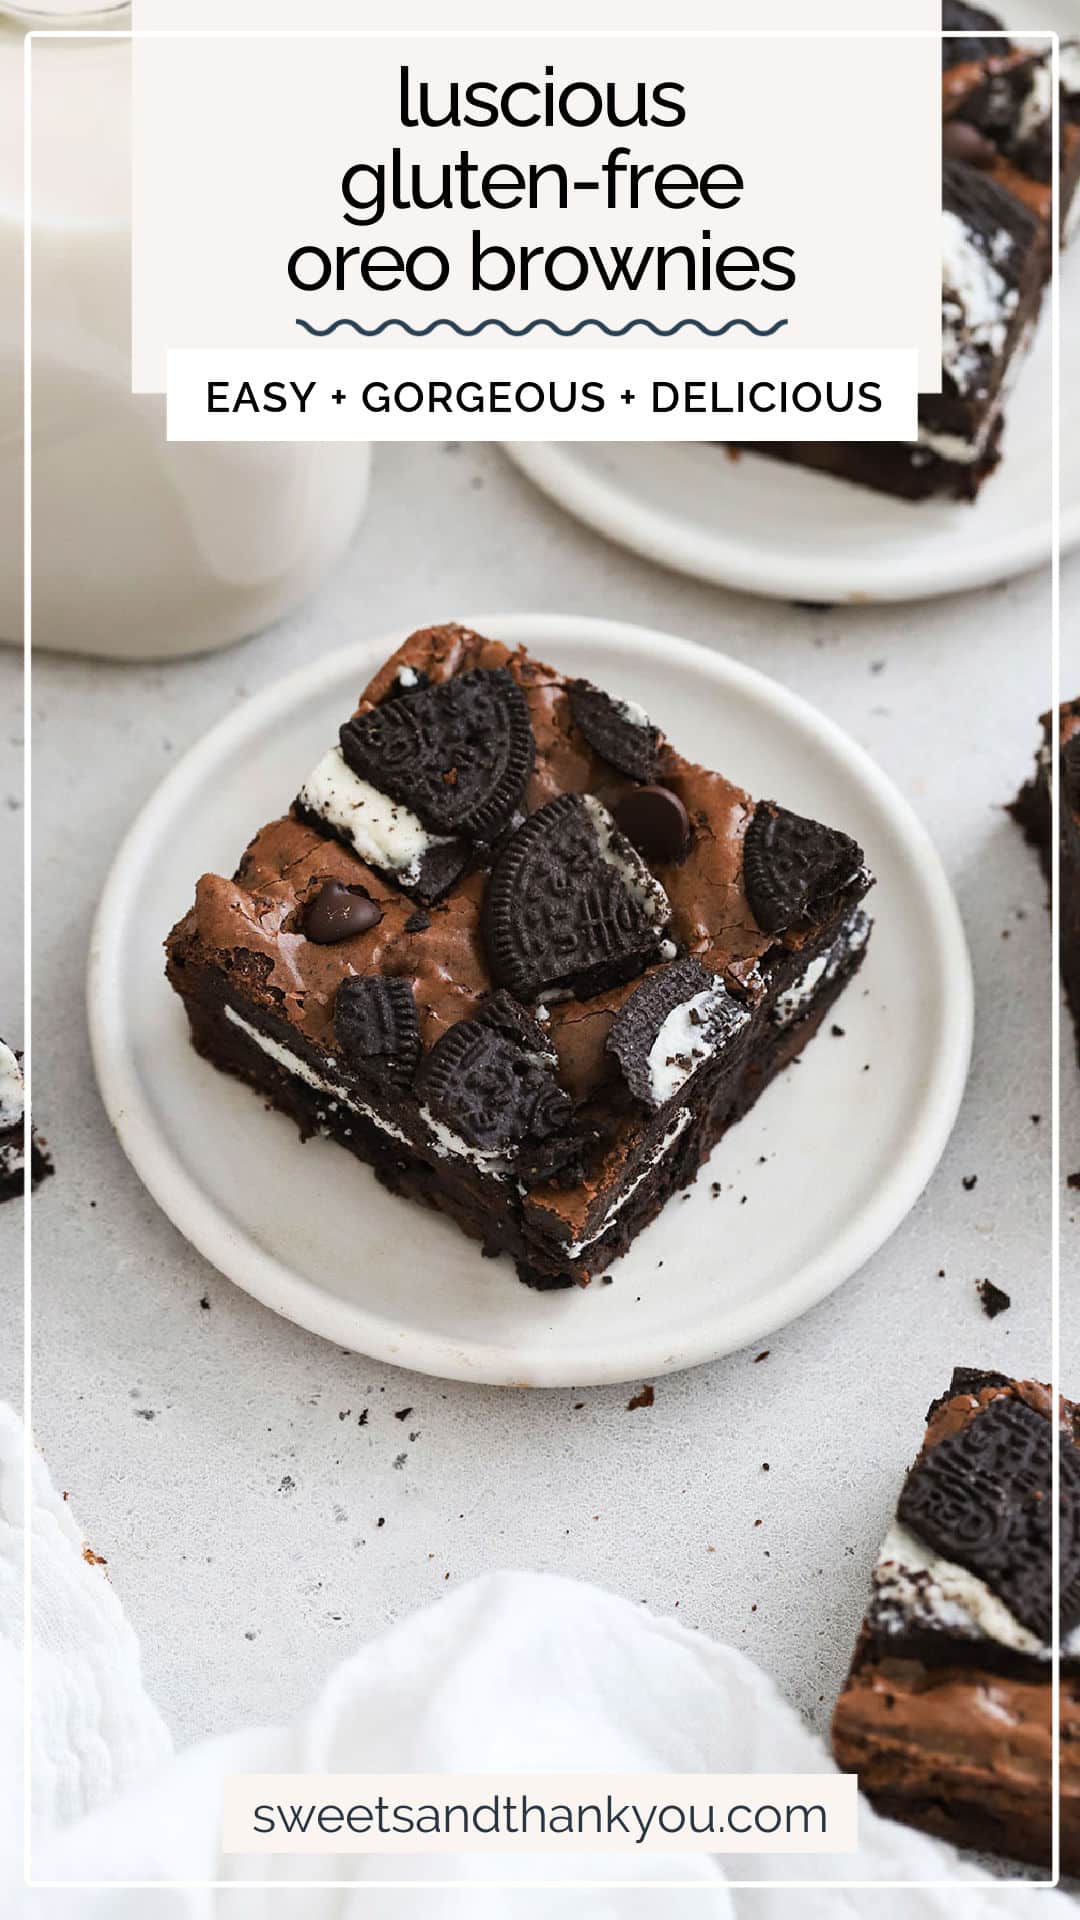 These luscious gluten-free oreo brownies are fudgy, chewy & delicious! If you love Oreos, you'll fall hard for these easy brownies! / gluten free oreo brownie recipe / the best oreo brownies / fudgy oreo brownies / chewy oreo brownies / oreo stuffed brownies / gluten free brownie recipe / gluten-free oreo brownies recipe / gluten free oreo desserts / 